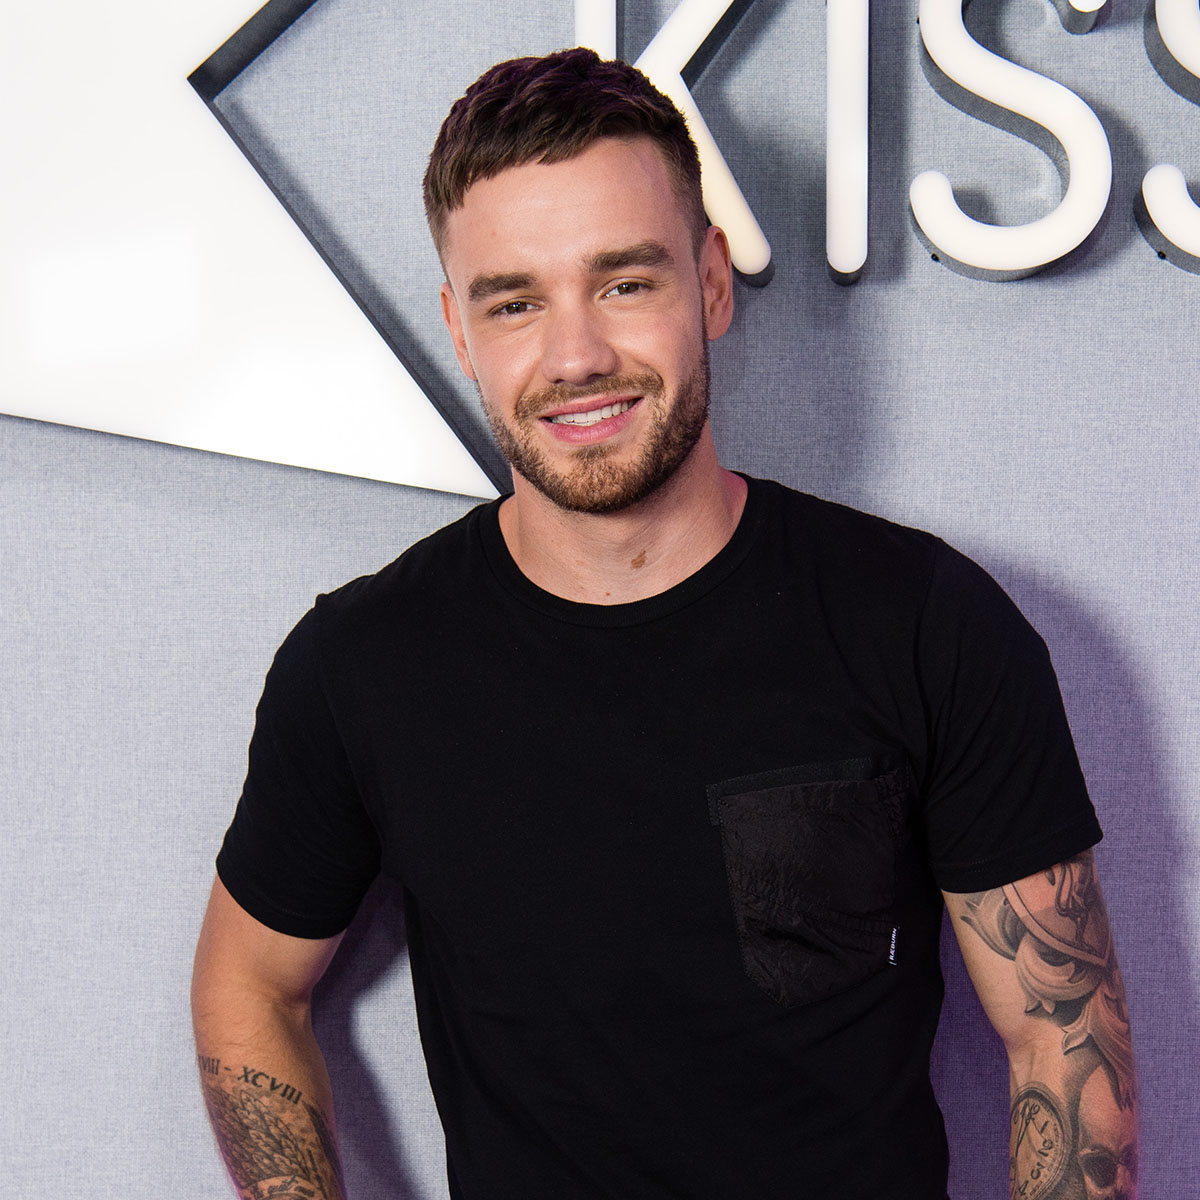 One Direction’s Liam Payne Shares He’s More Than 100 Days Sober